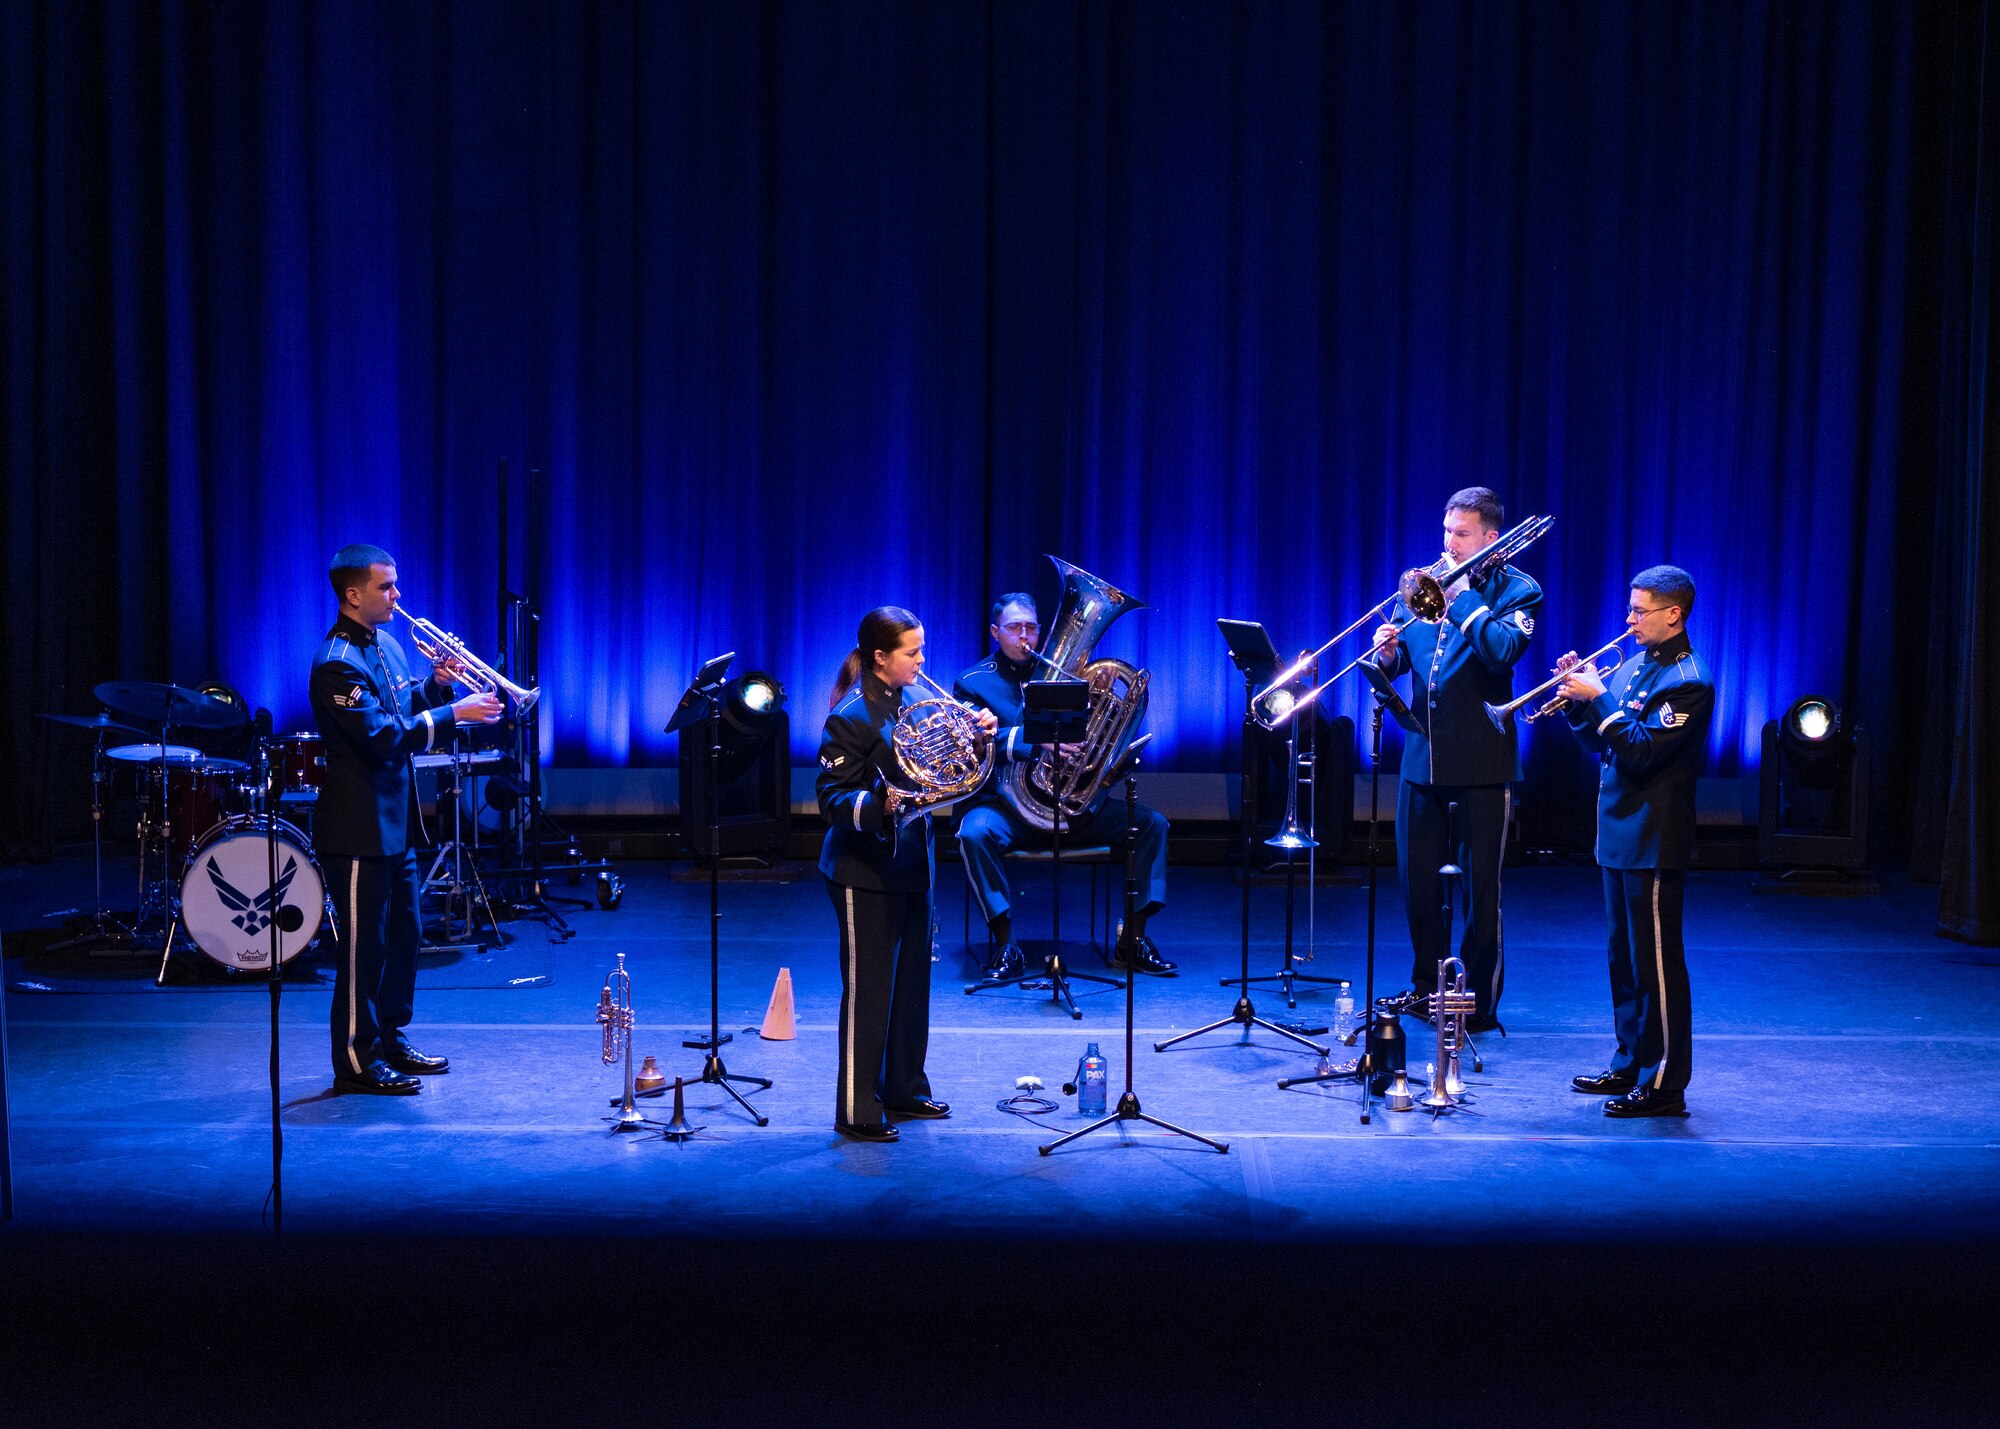 Five members of Heritage Brass ensemble performs on stage